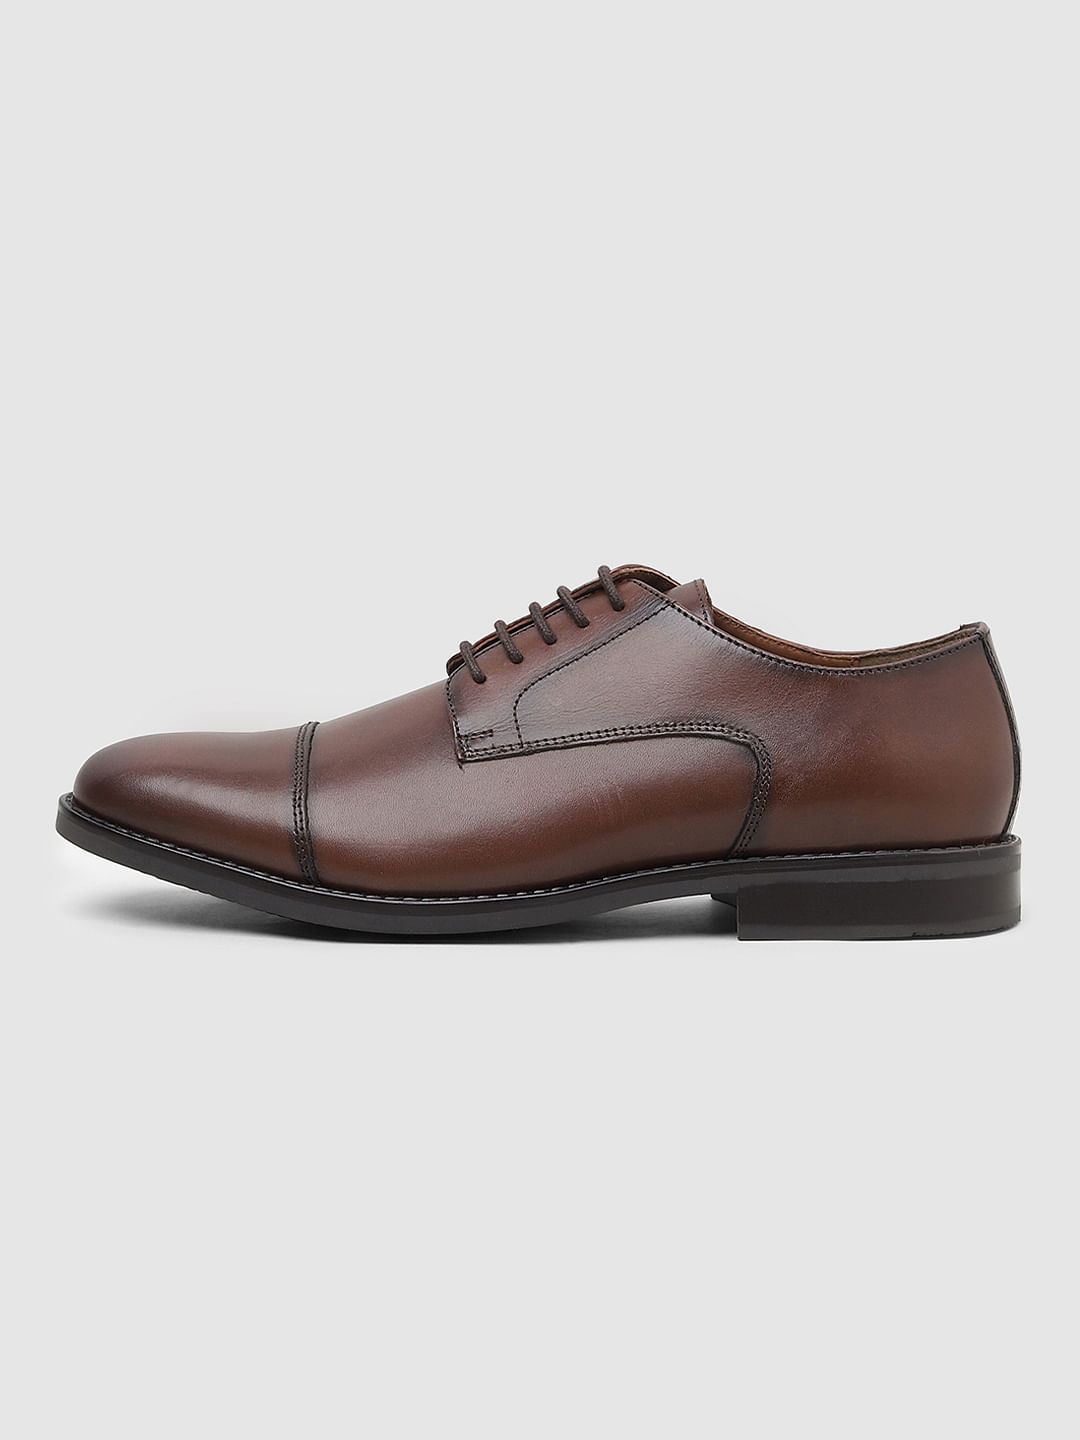 9 best shops for men's dress shoes in Singapore | Honeycombers